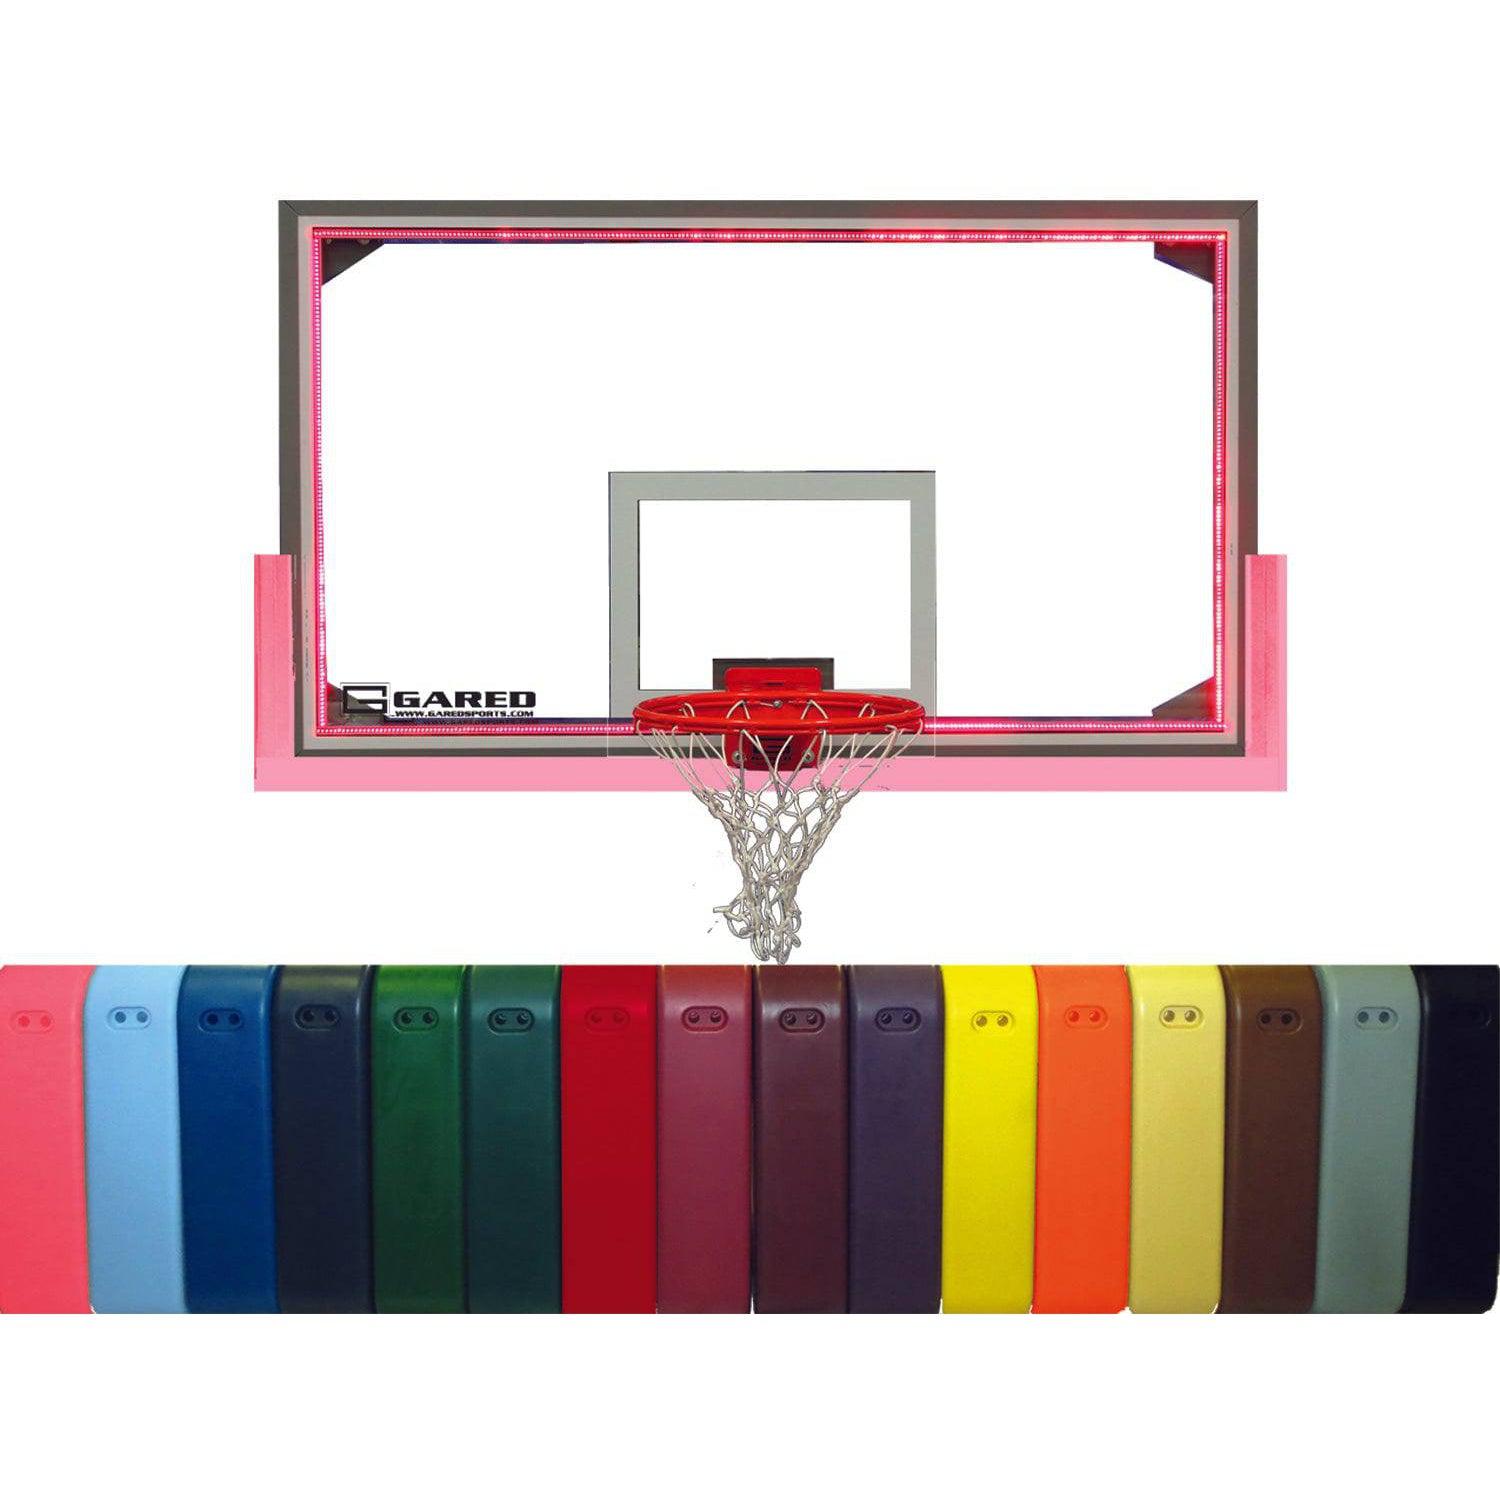 Gared Sports Buzzer Beater Gymnasium Backboard Packages